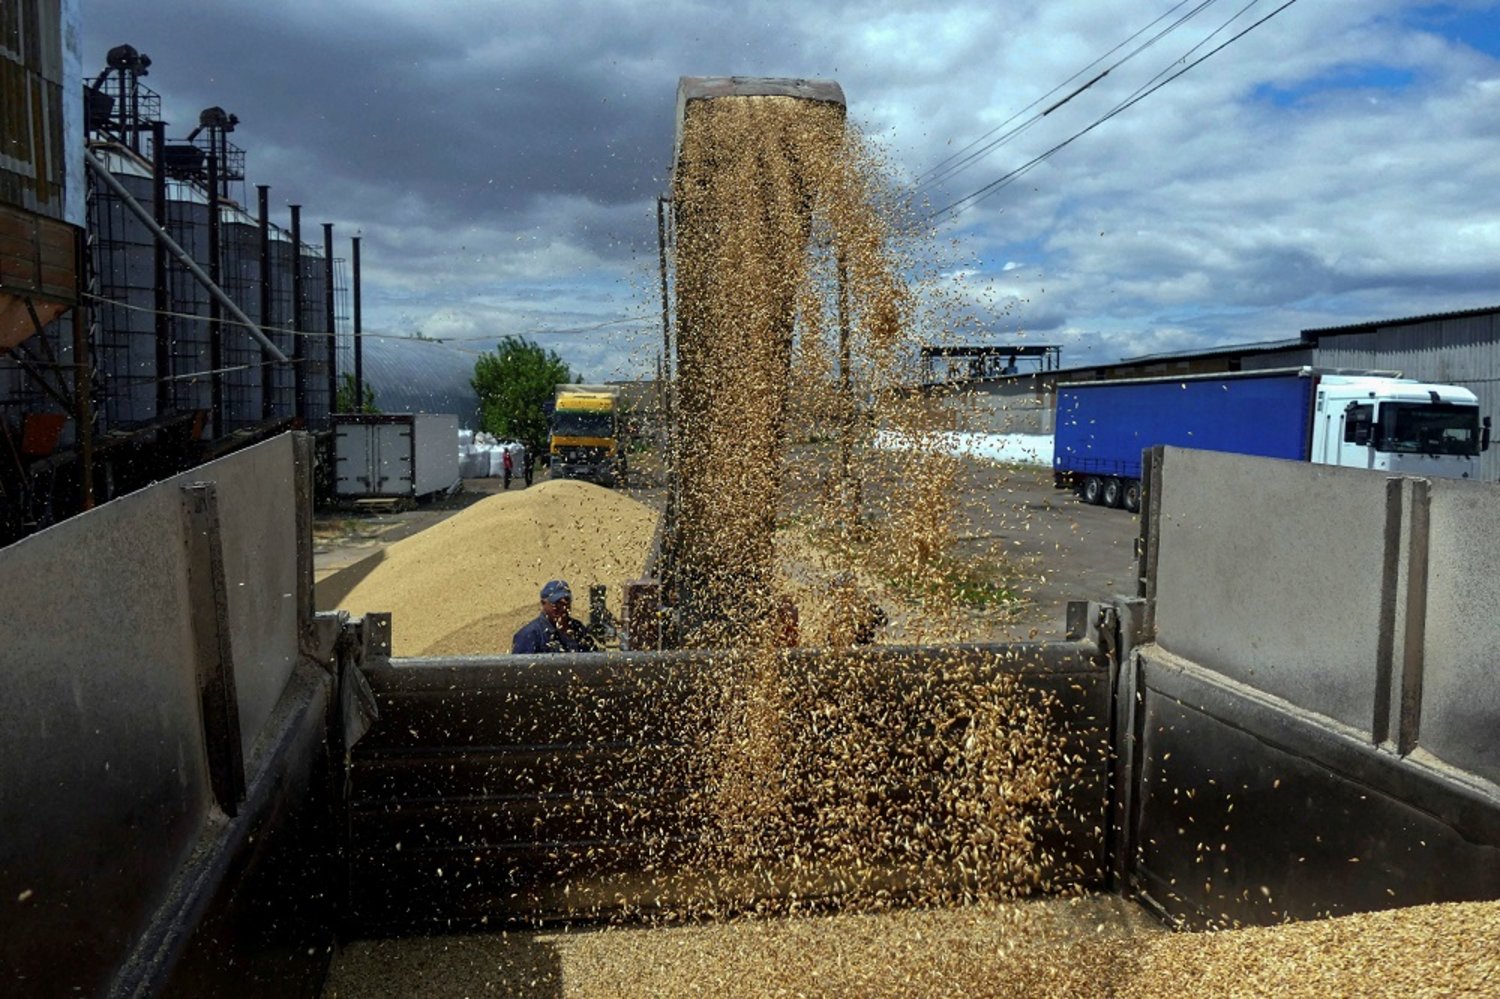 A worker loads a truck with grain at a terminal during barley harvesting in Odesa region, as Russia's attack on Ukraine continues, Ukraine June 23, 2022. (Reuters)